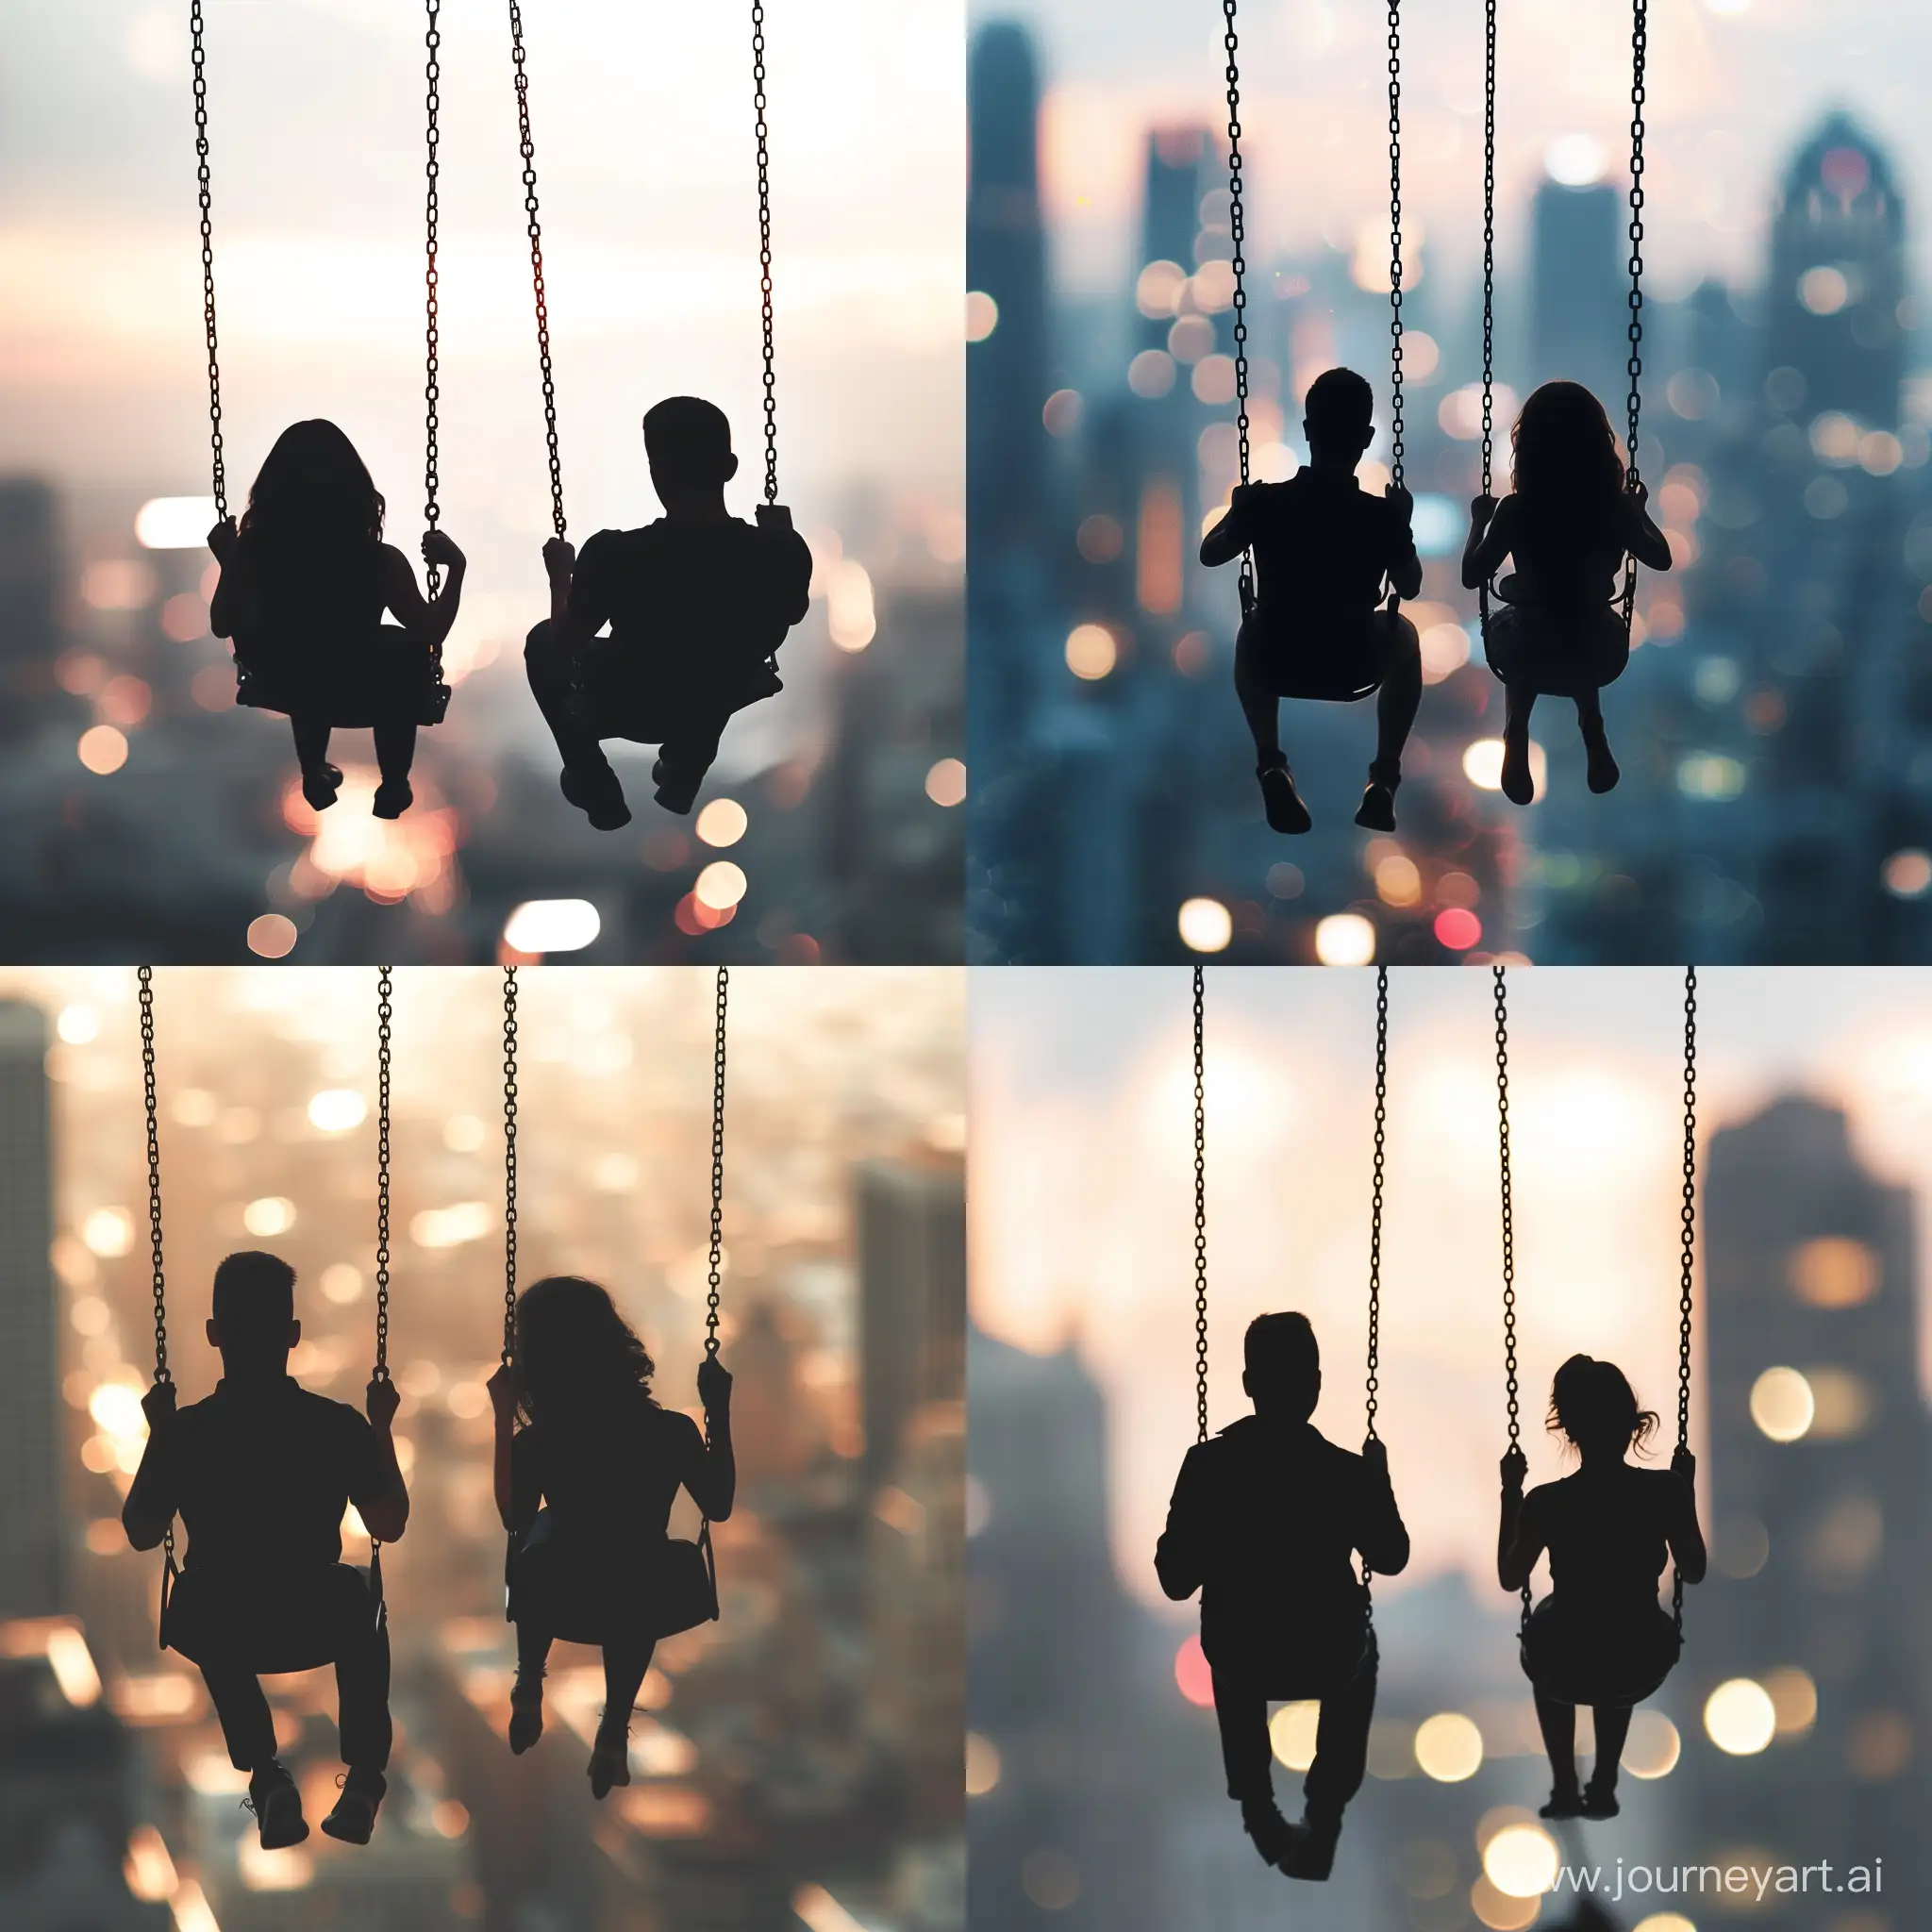 Romantic-Couple-Swinging-Silhouettes-in-City-Lights